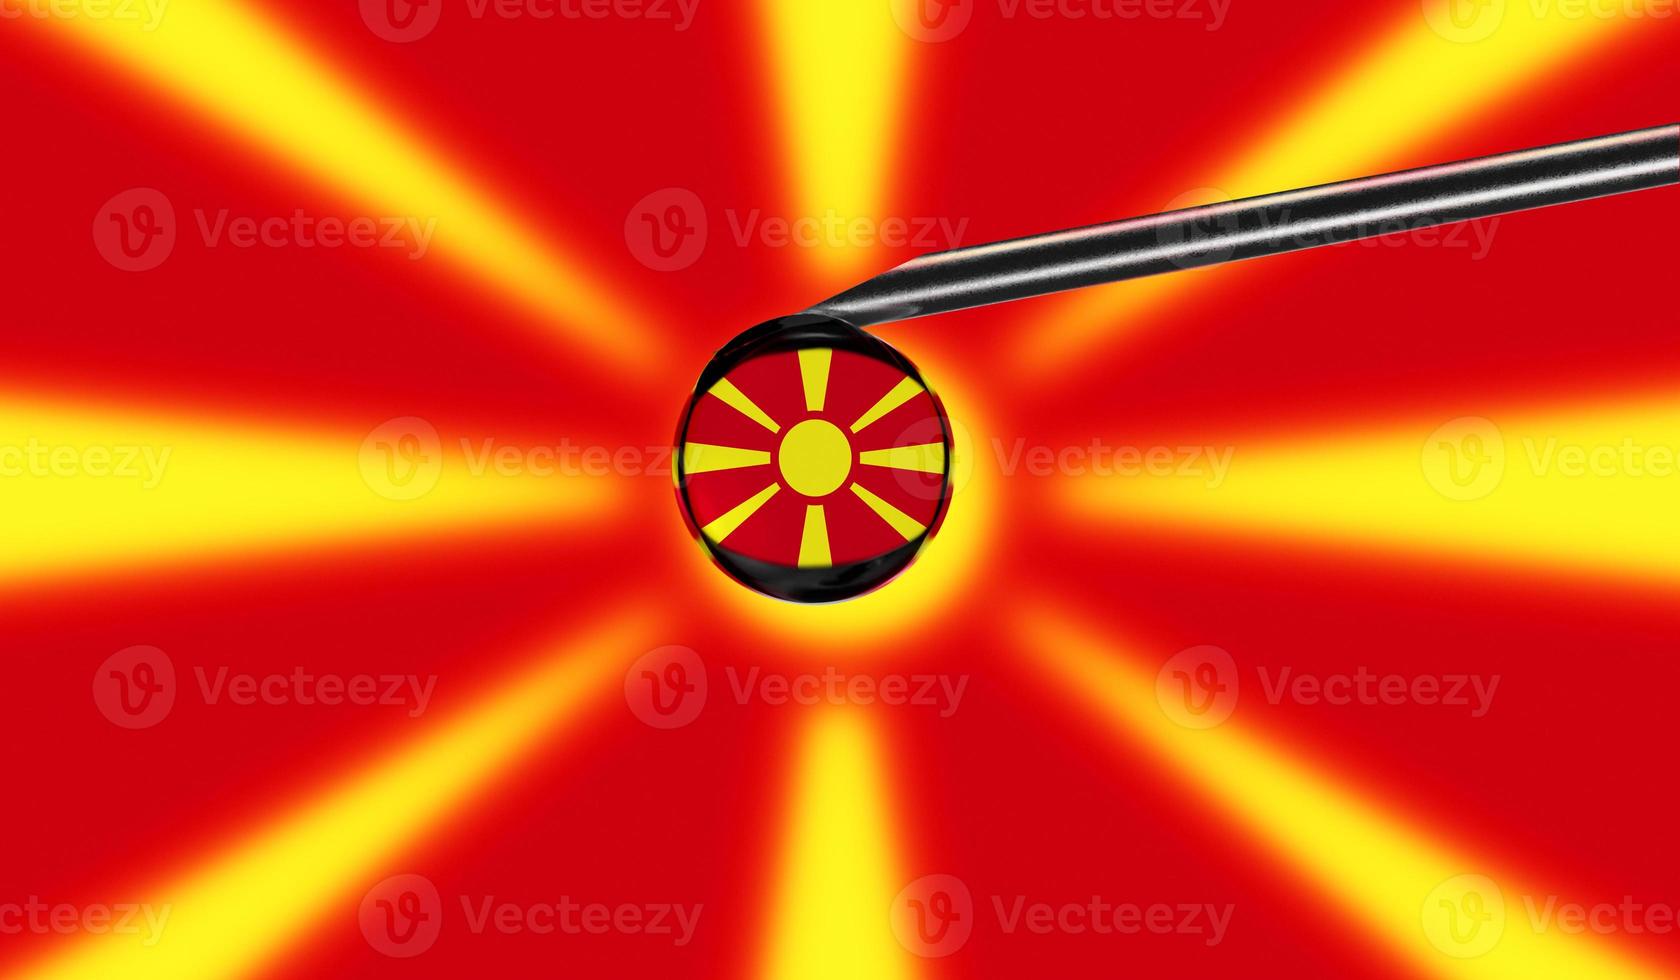 Vaccine syringe with drop on needle against national flag of Macedonia background. Medical concept vaccination. Coronavirus Sars-Cov-2 pandemic protection. National safety idea. photo